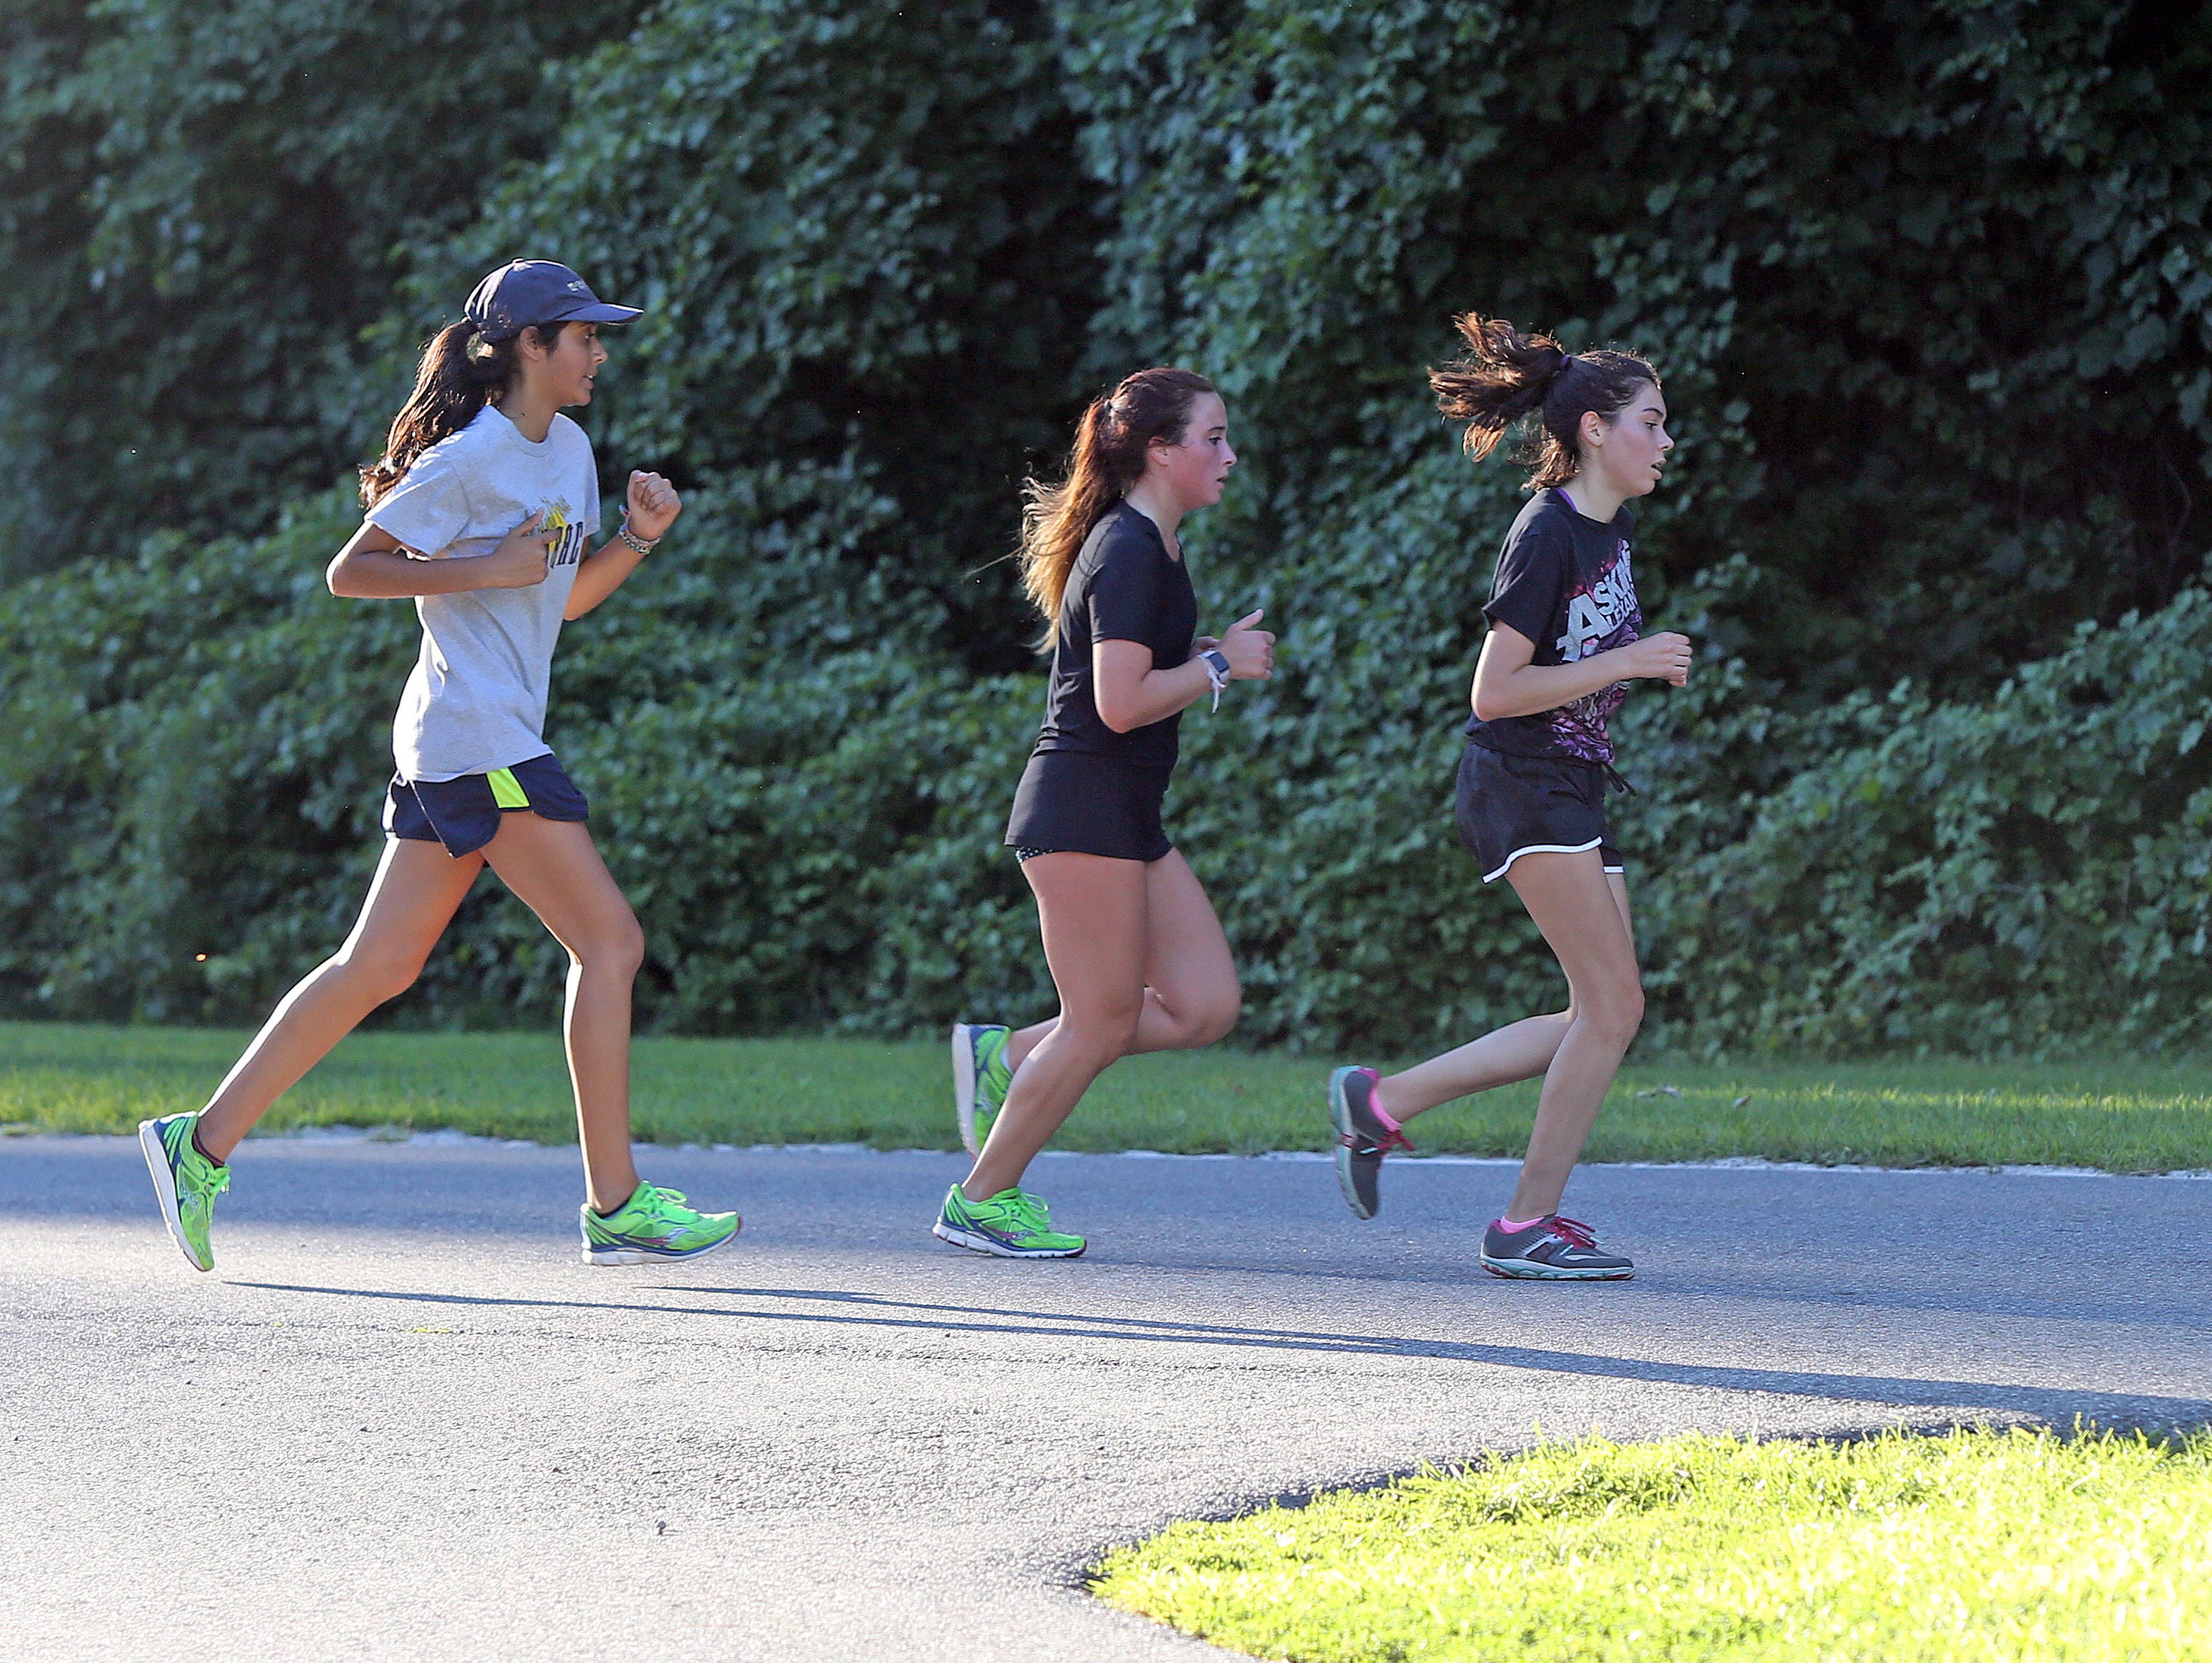 The Lakeland/Panas boys and girls cross-country teams are practicing at Downing Park in Yorktown on Aug. 22, 2016.